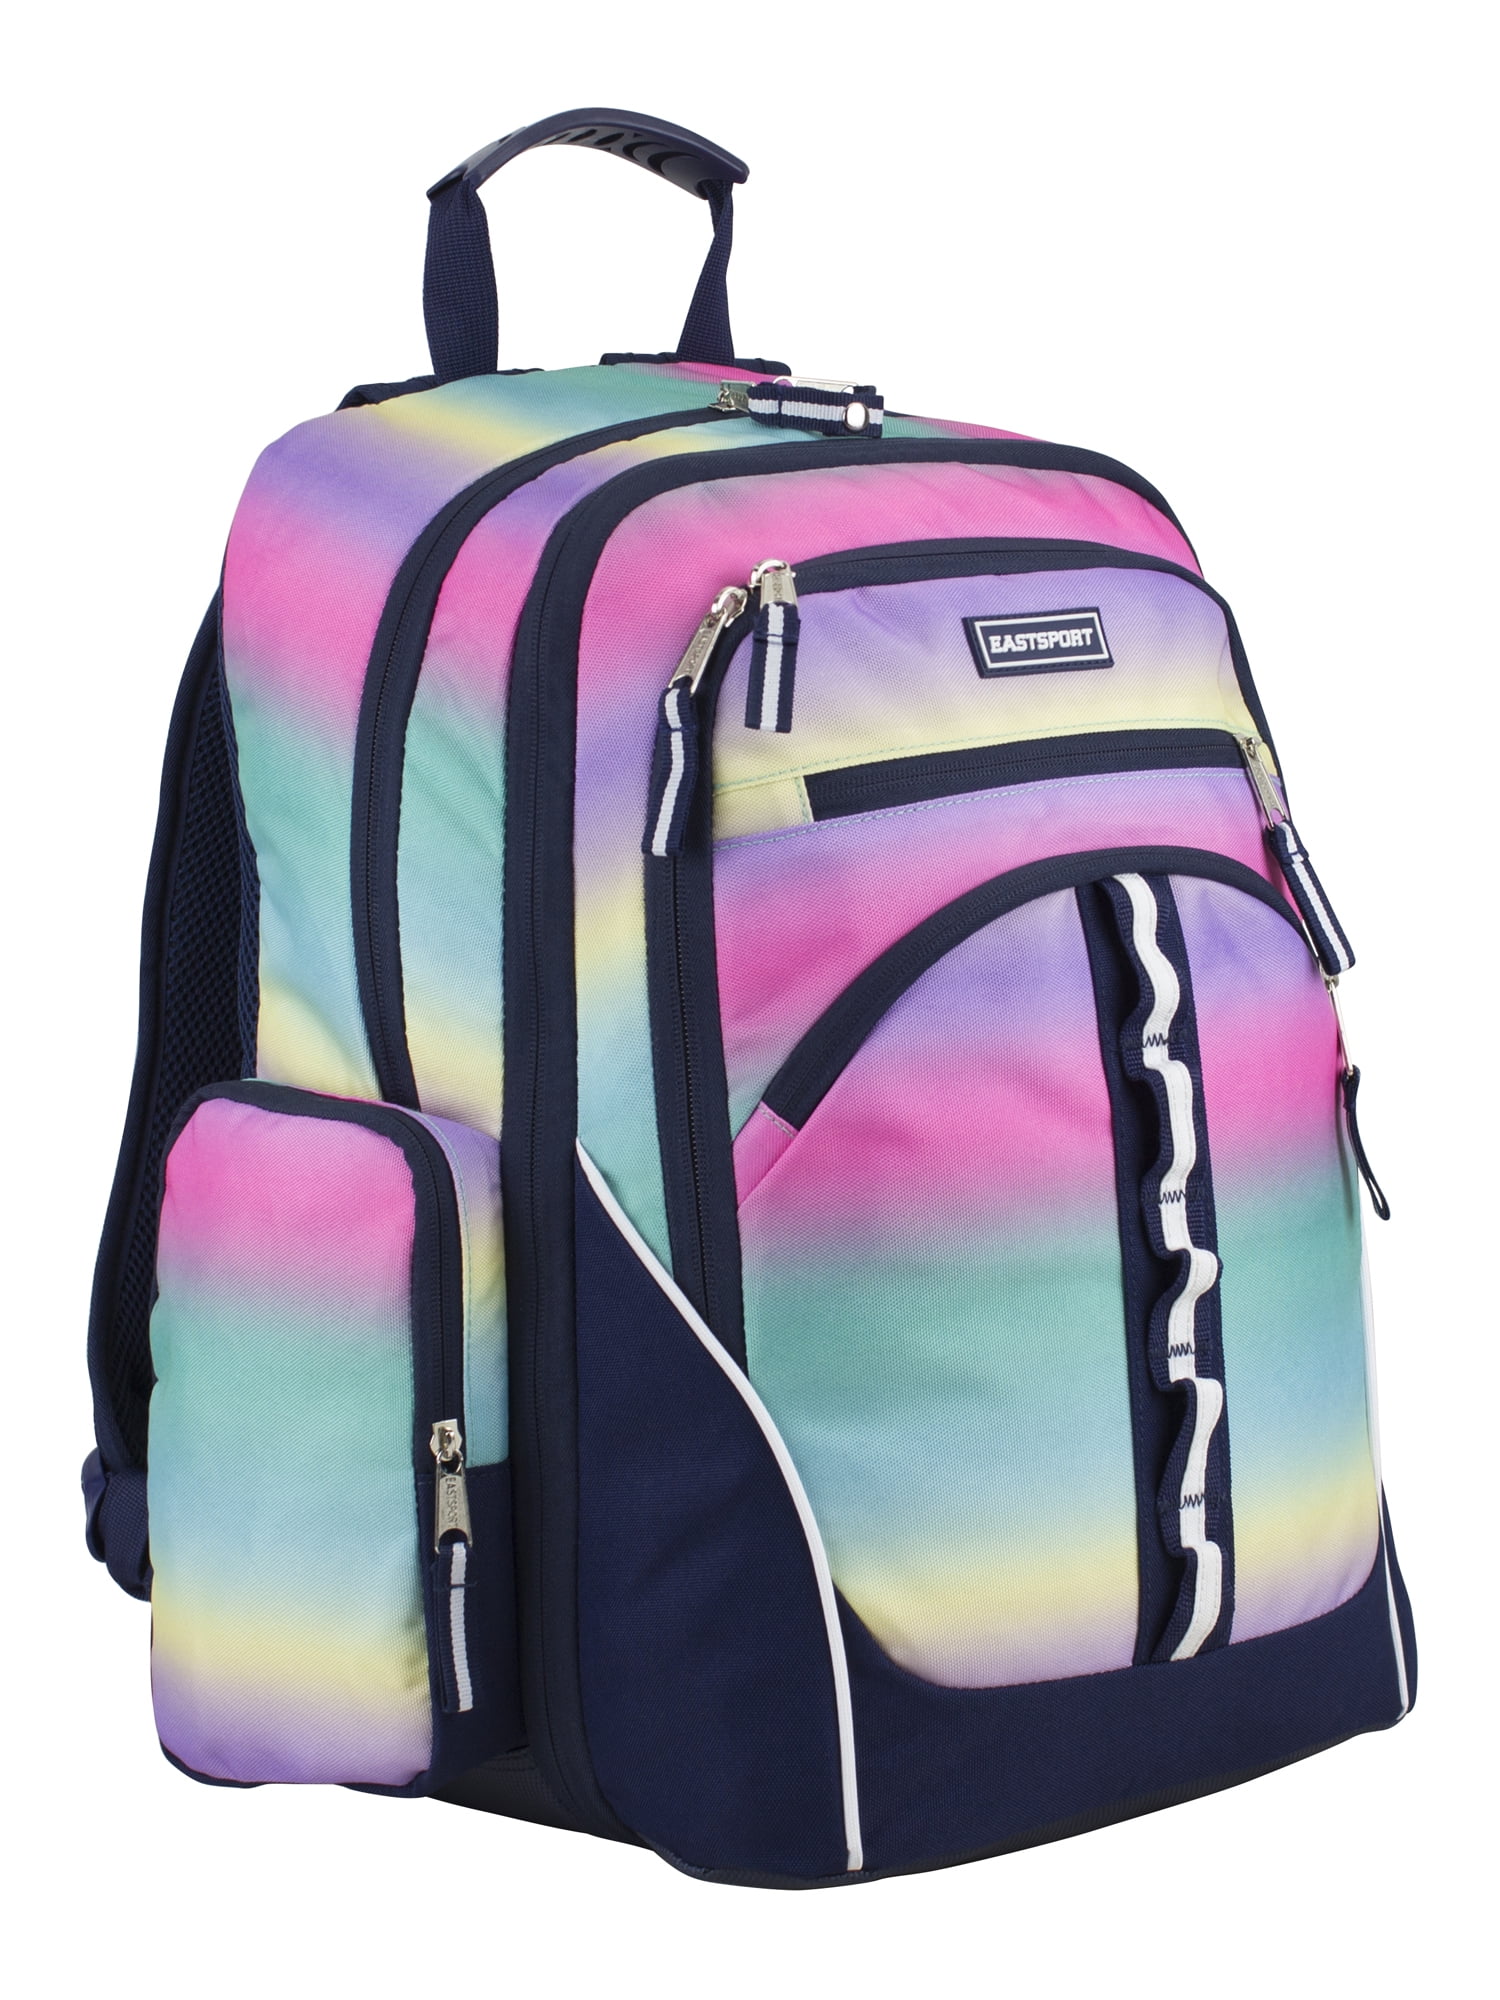 Eastsport Unisex Expandable Velocity Backpack, Pretty Ombre